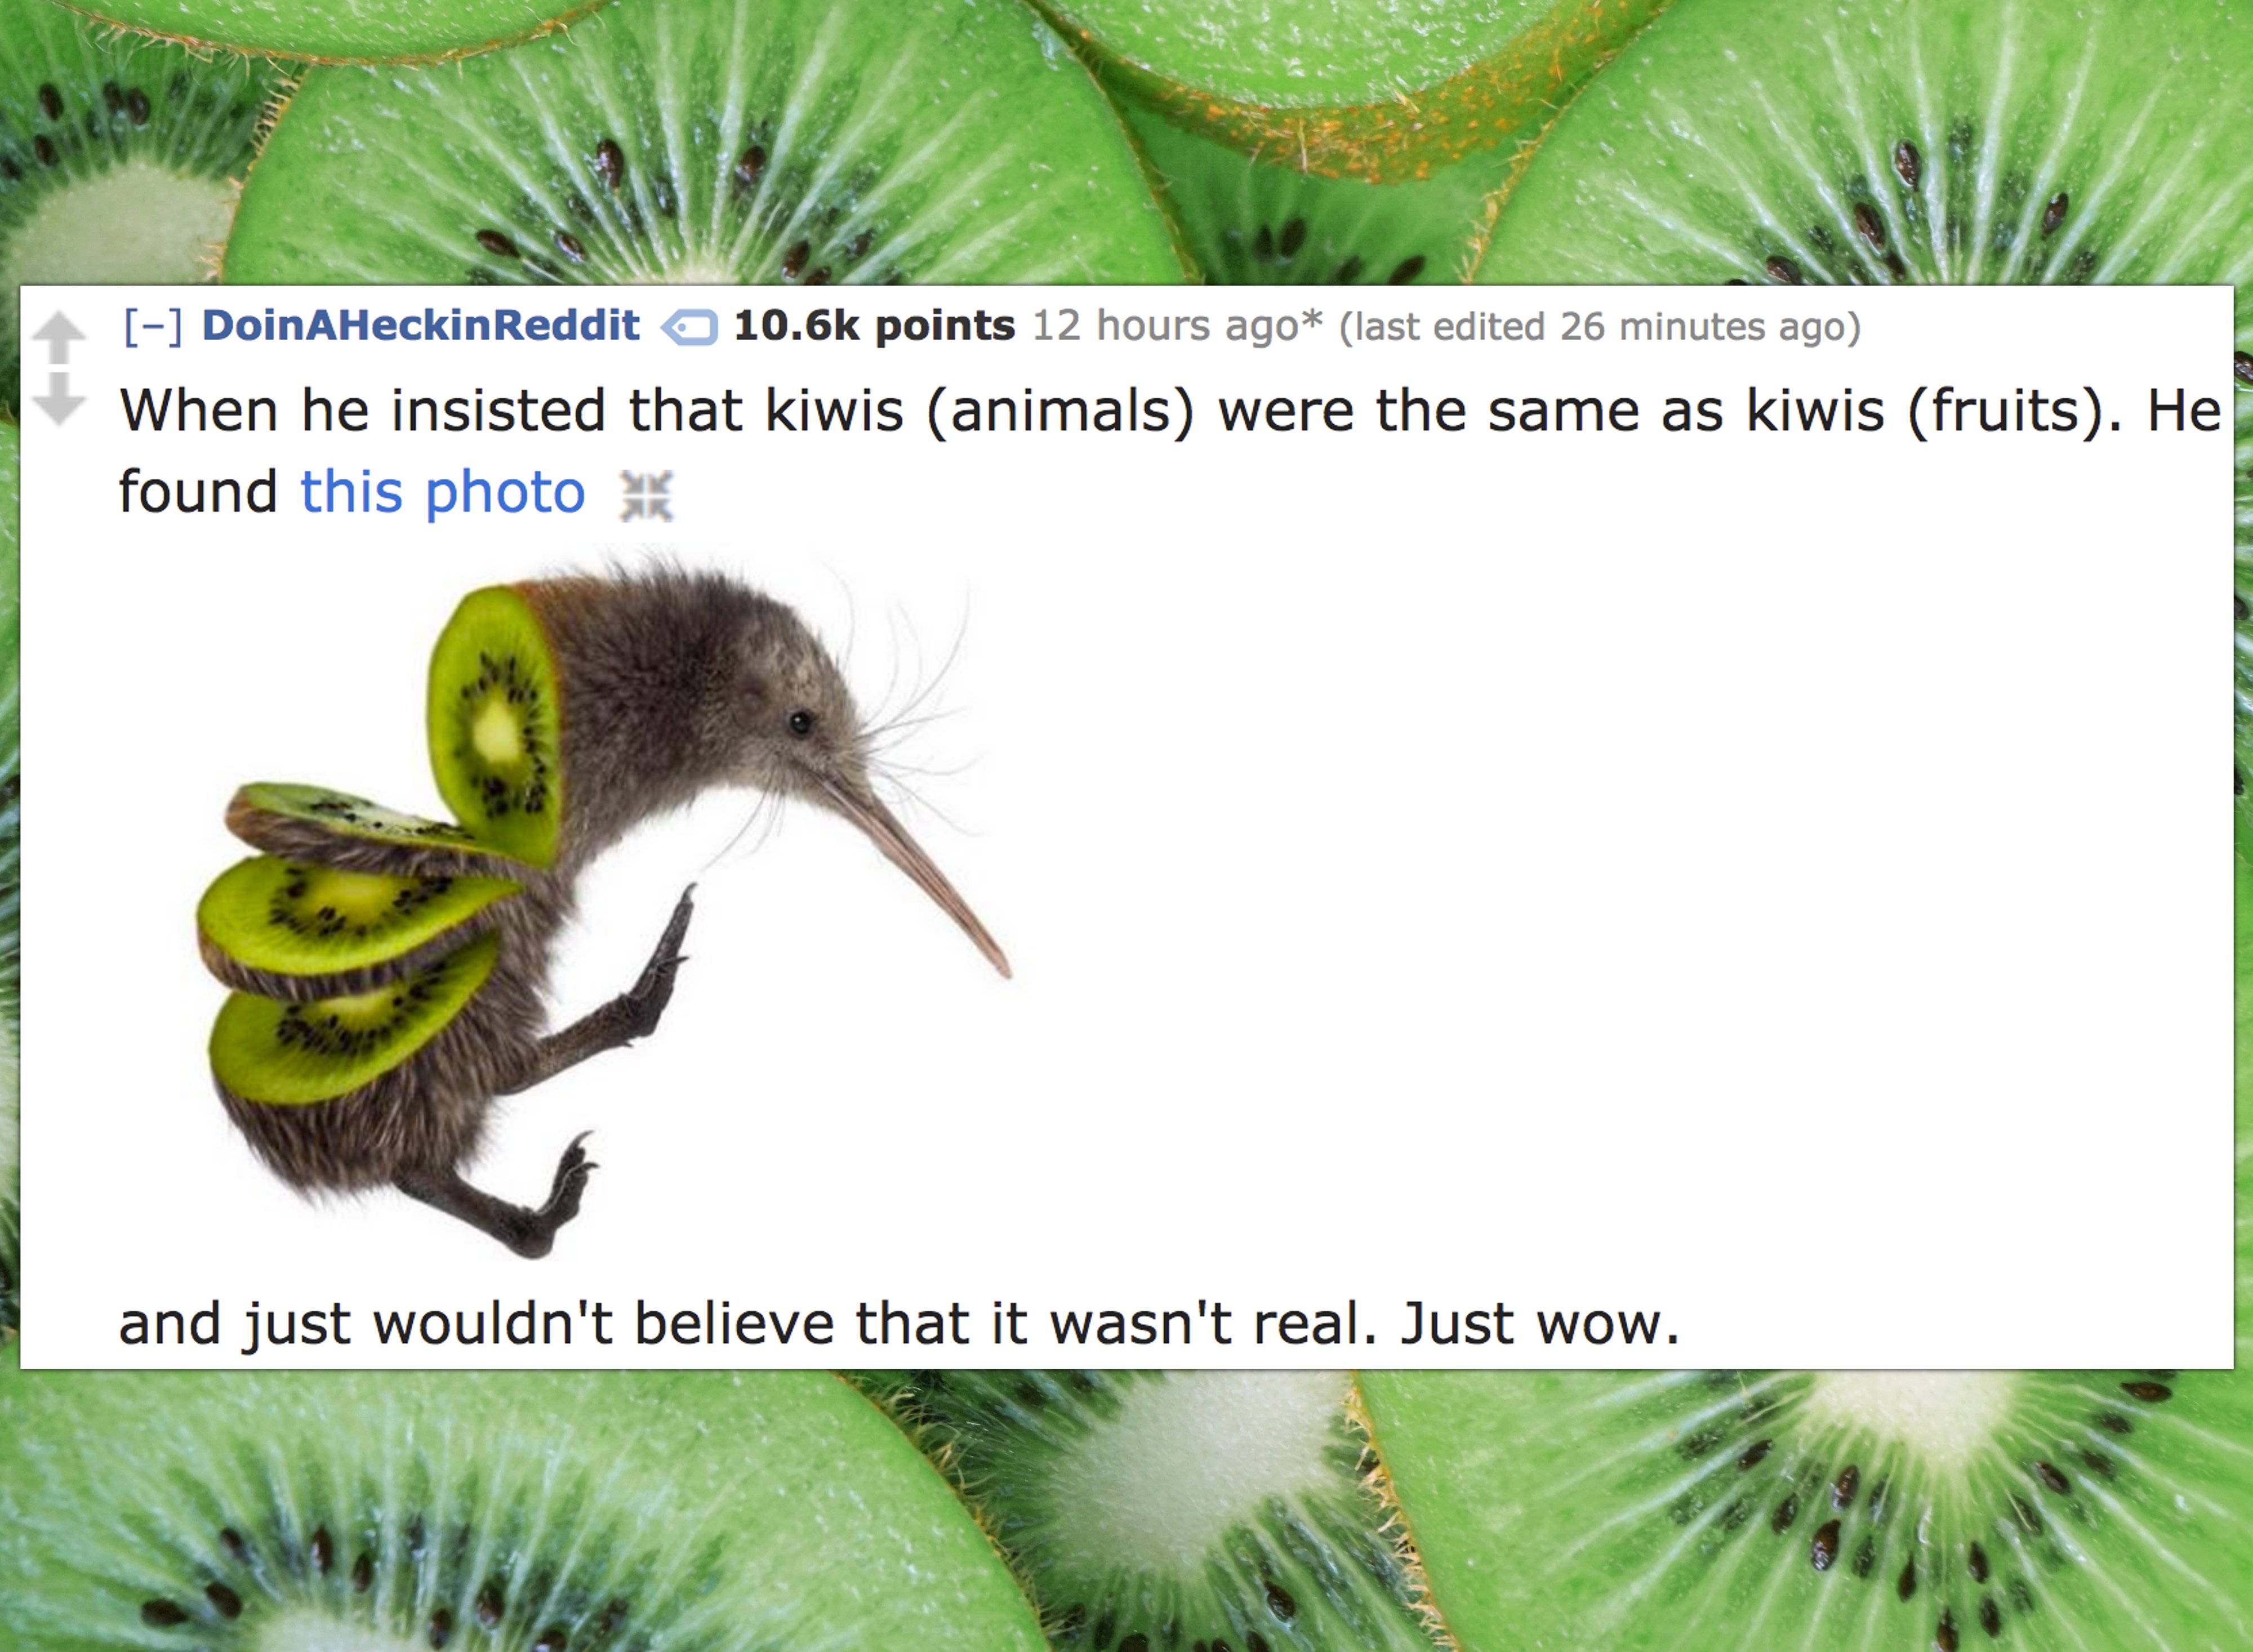 kiwi bird and fruit - DoinHeckinReddit points 12 hours ago last edited 26 minutes ago When he insisted that kiwis animals were the same as kiwis fruits. He found this photo X and just wouldn't believe that it wasn't real. Just wow.